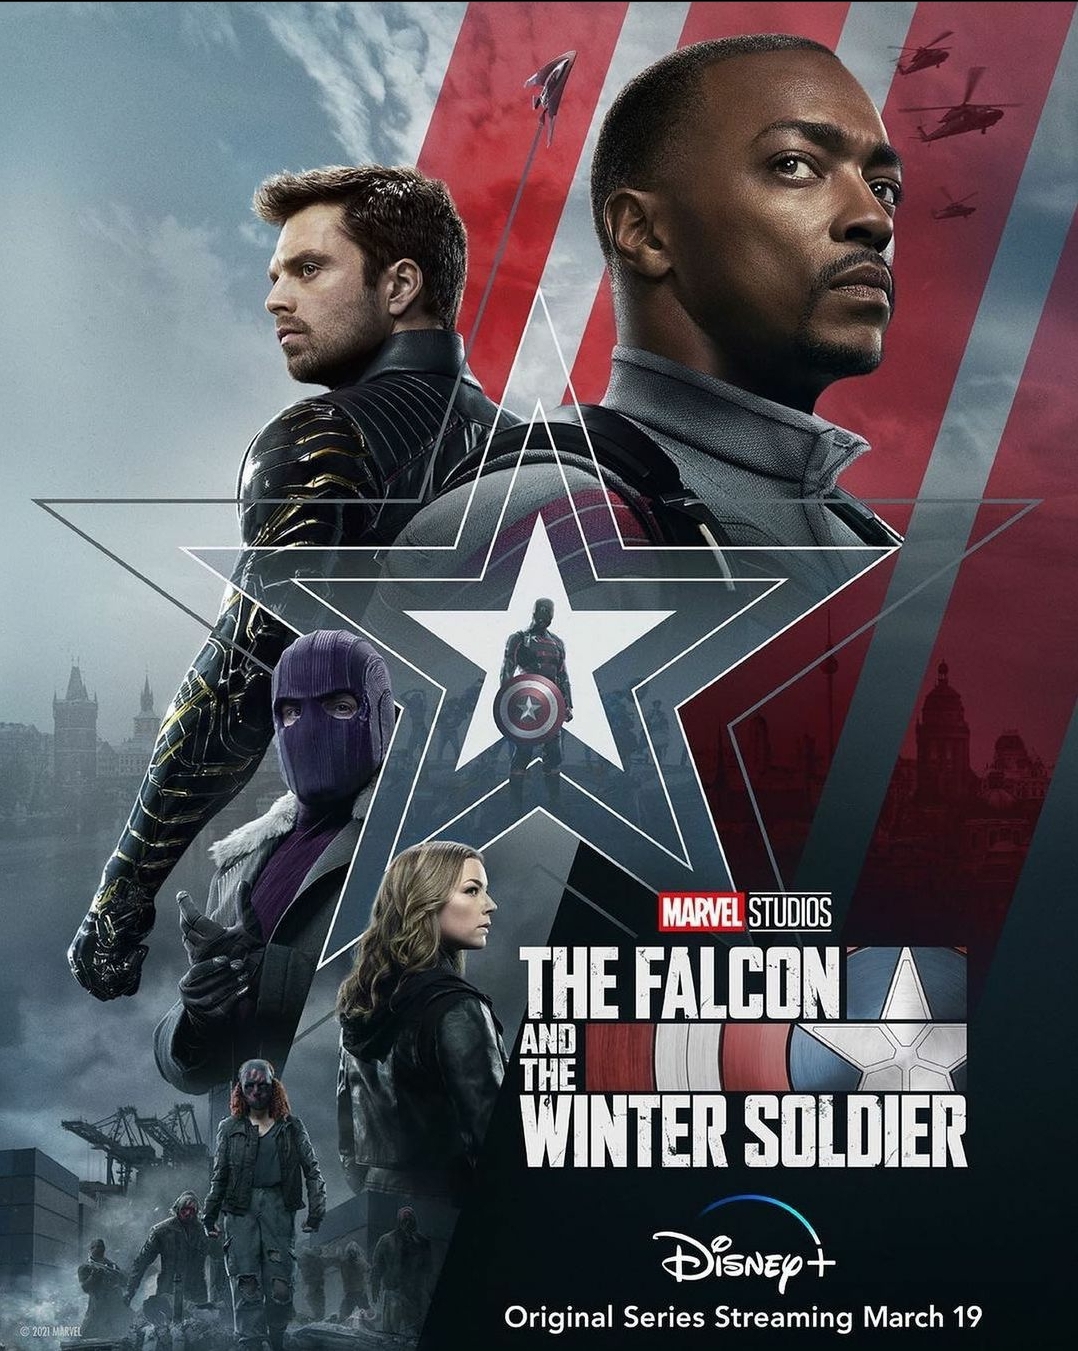 New Poster for 'The Falcon And The Winter Soldier'